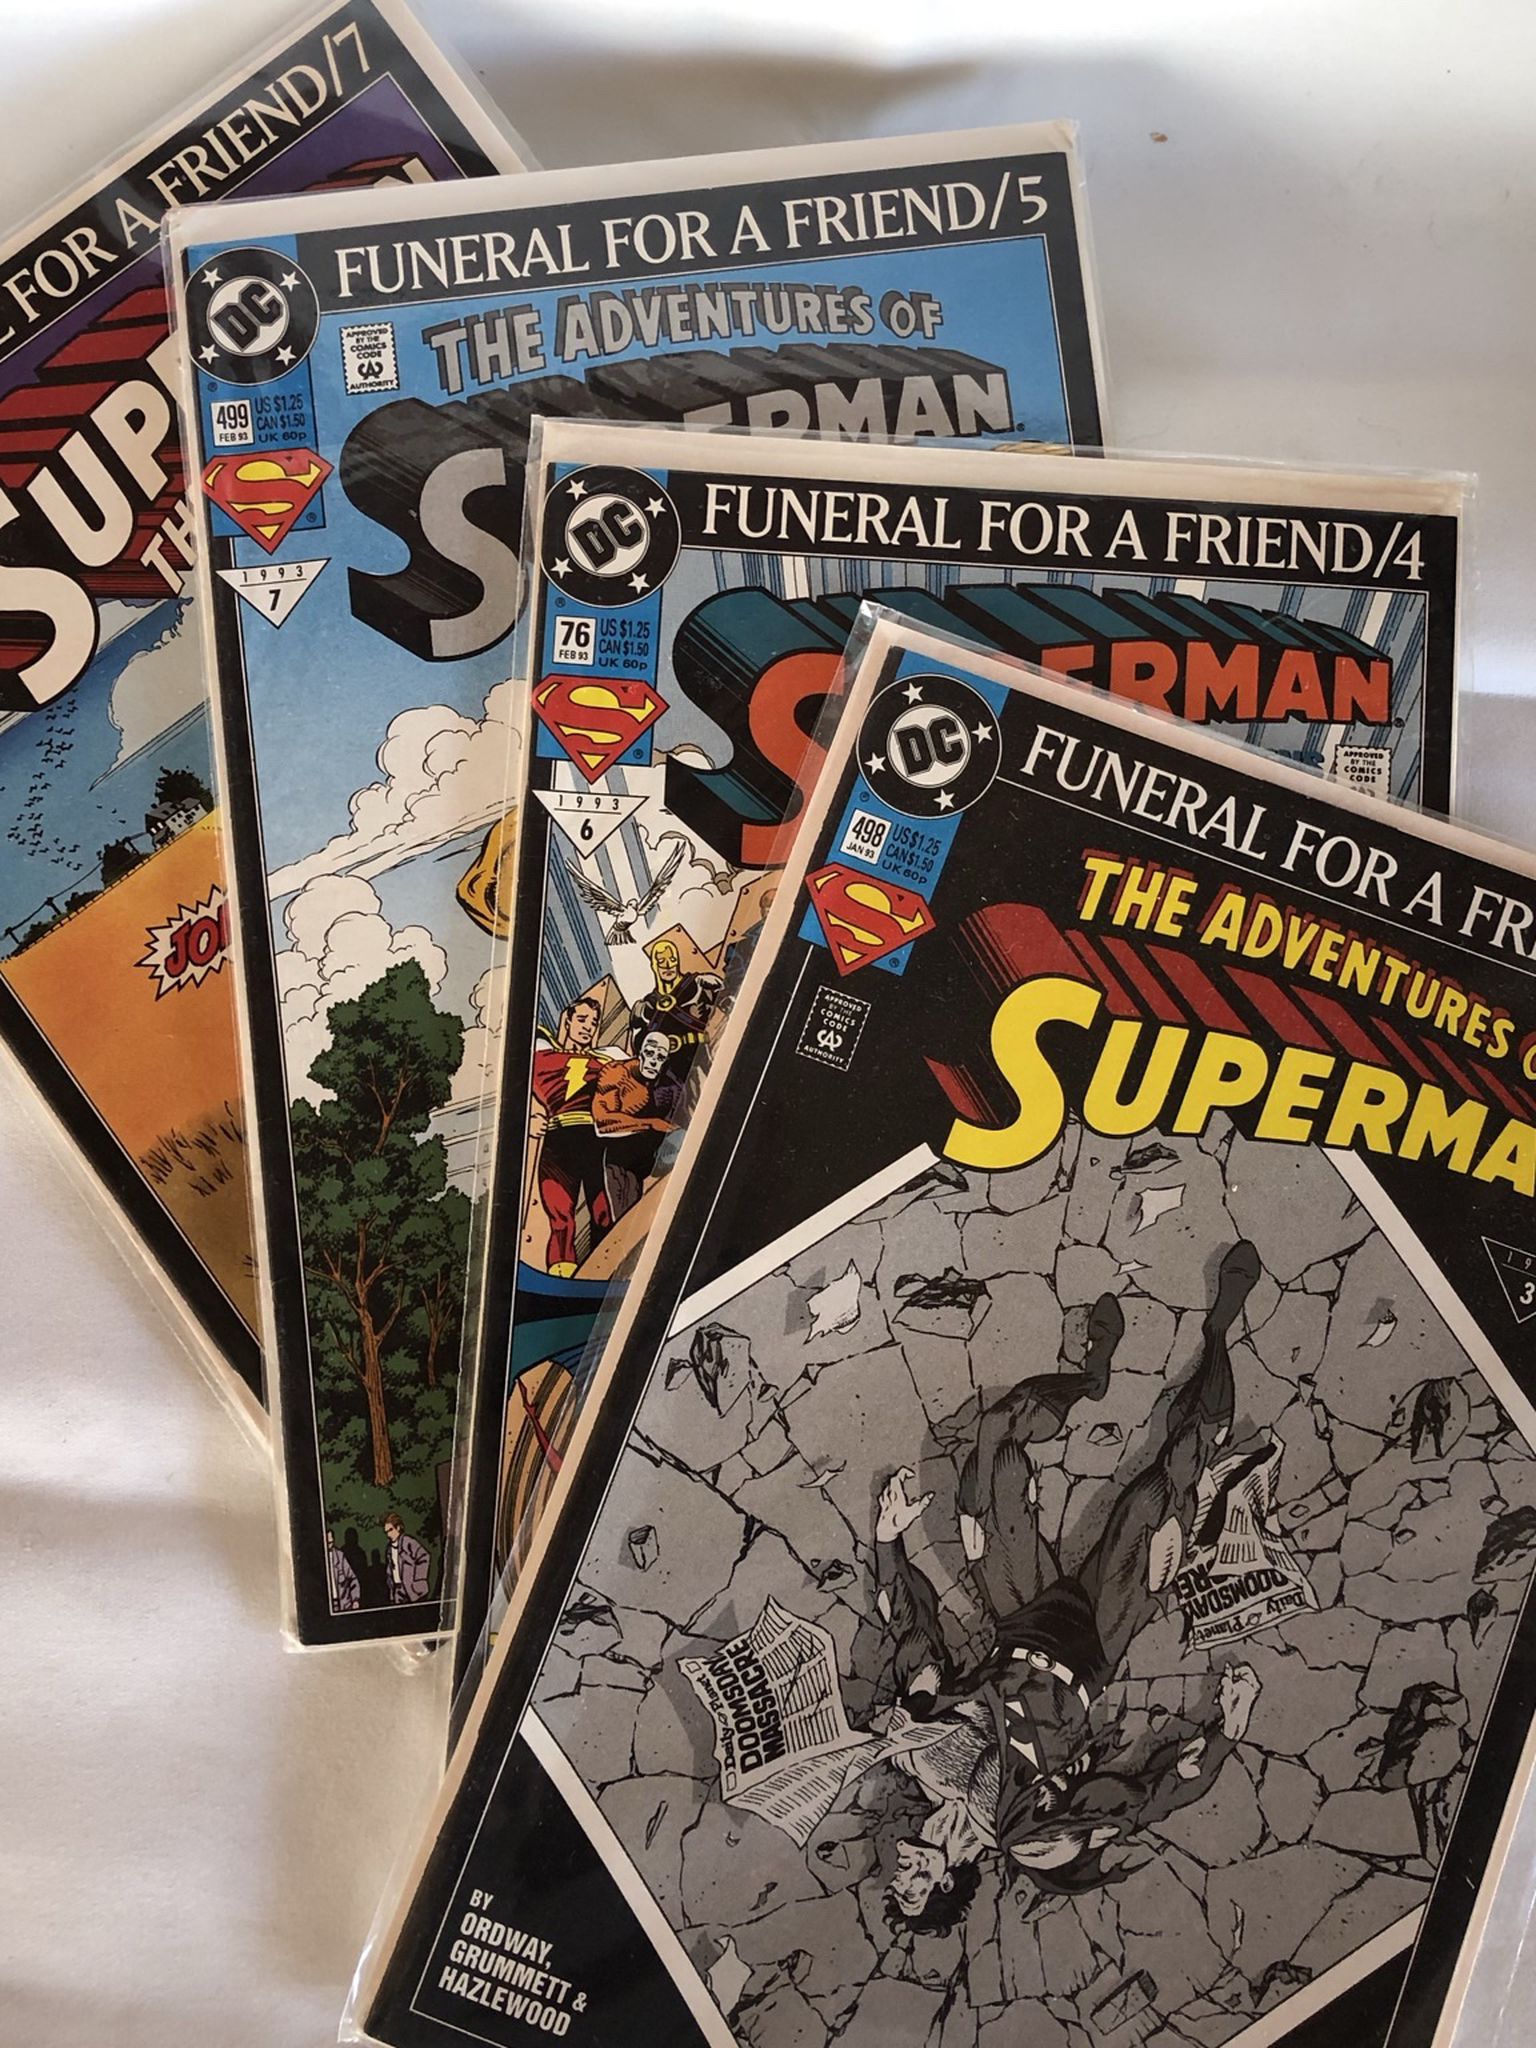 Superman “Funeral For A Friend”